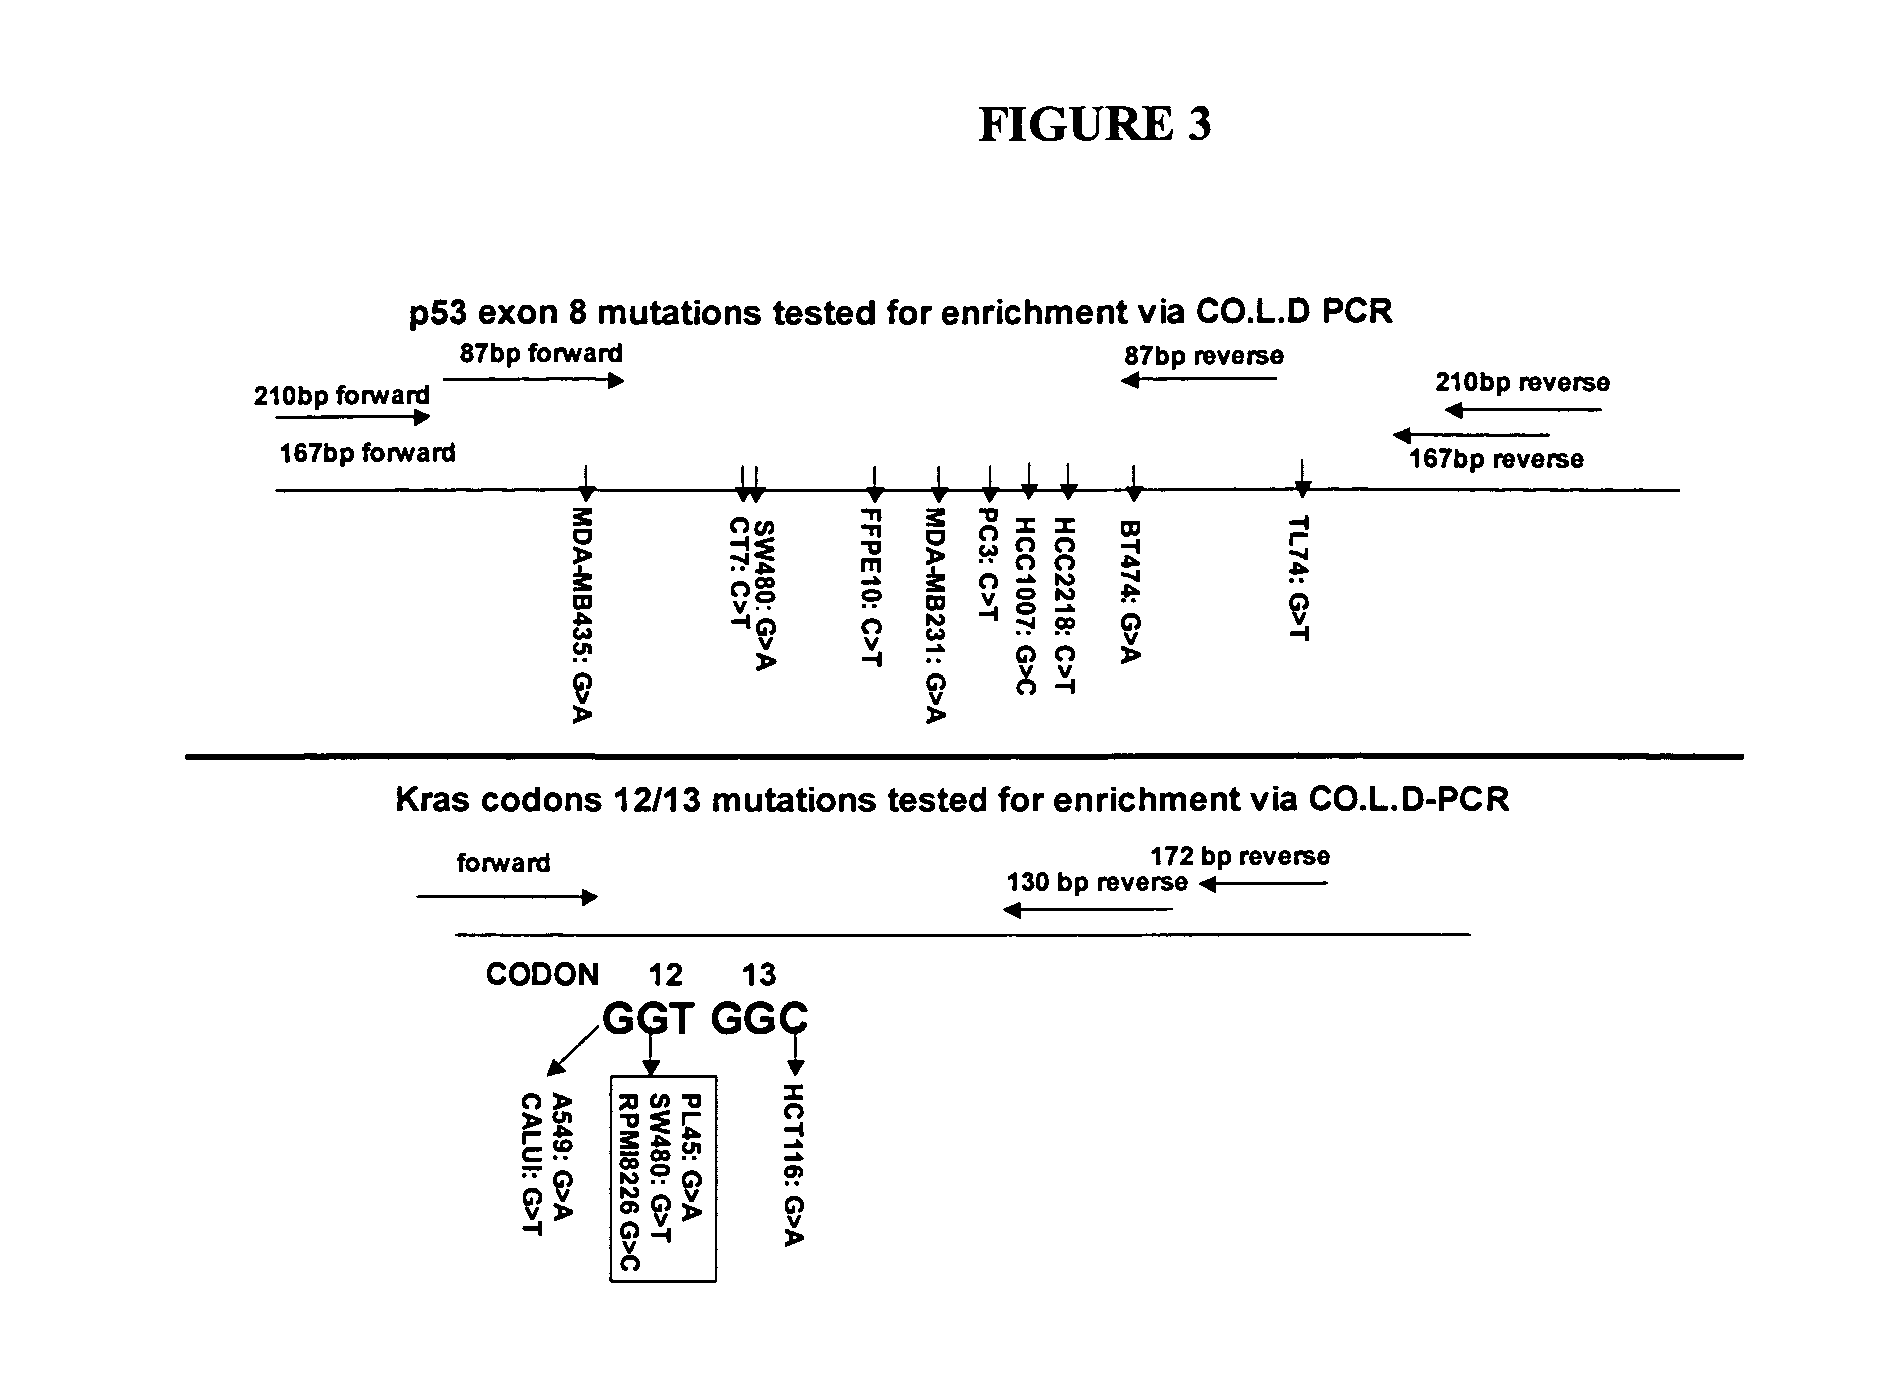 Enrichment of a target sequence